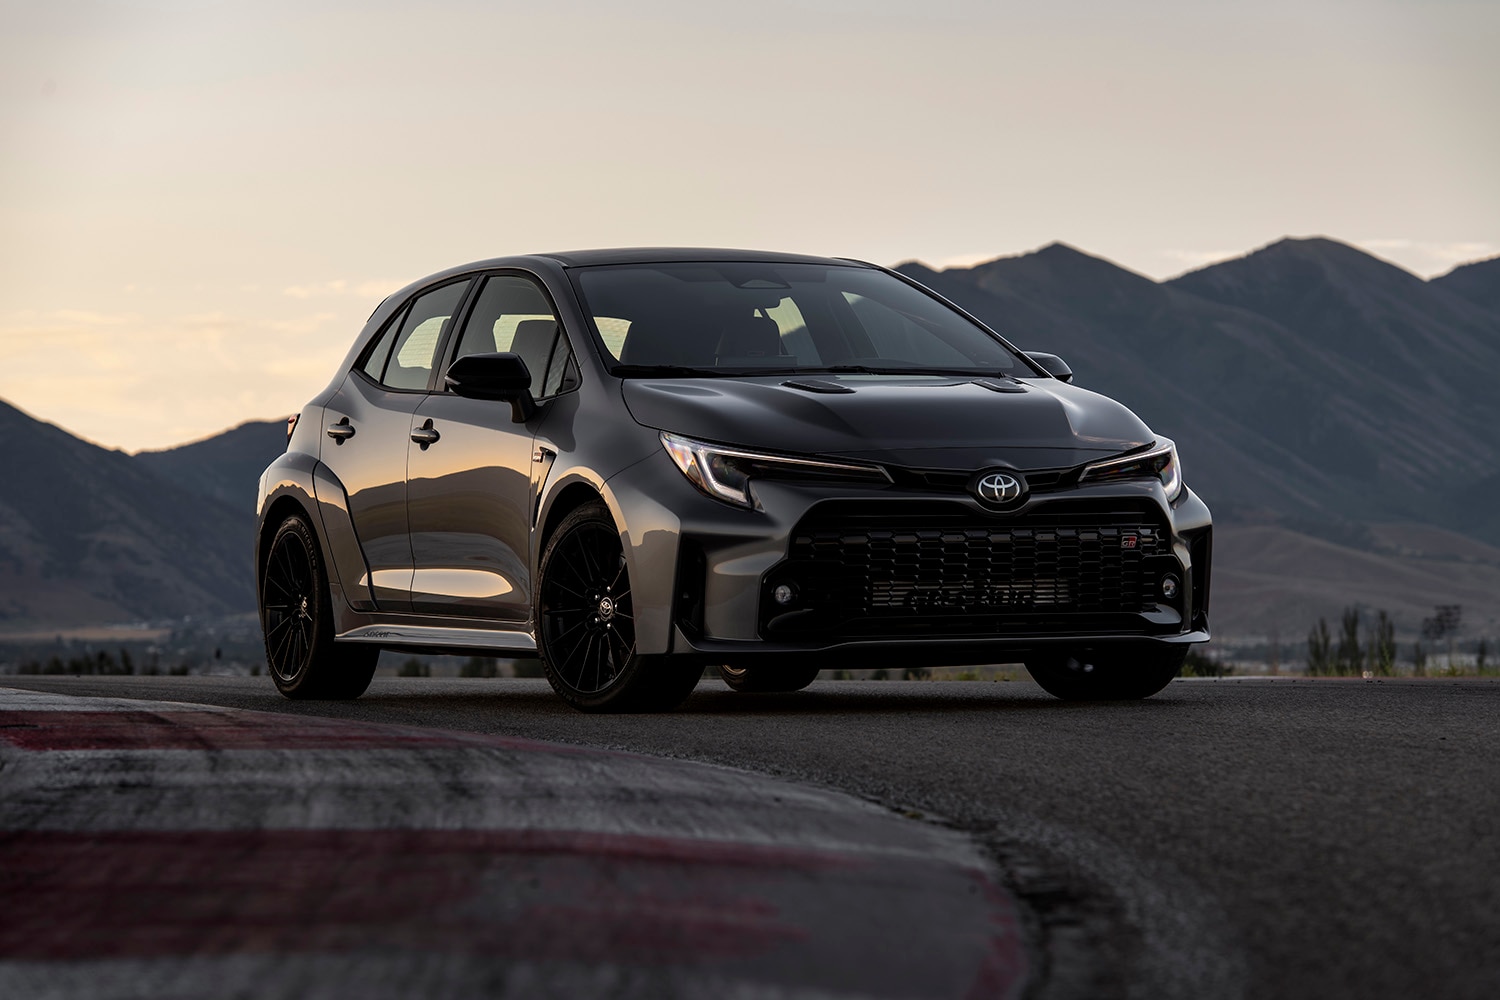 2023 Toyota GR Corolla Circuit Edition painted in Heavy Metal (dark gray) and parked near a racetrack corner apex